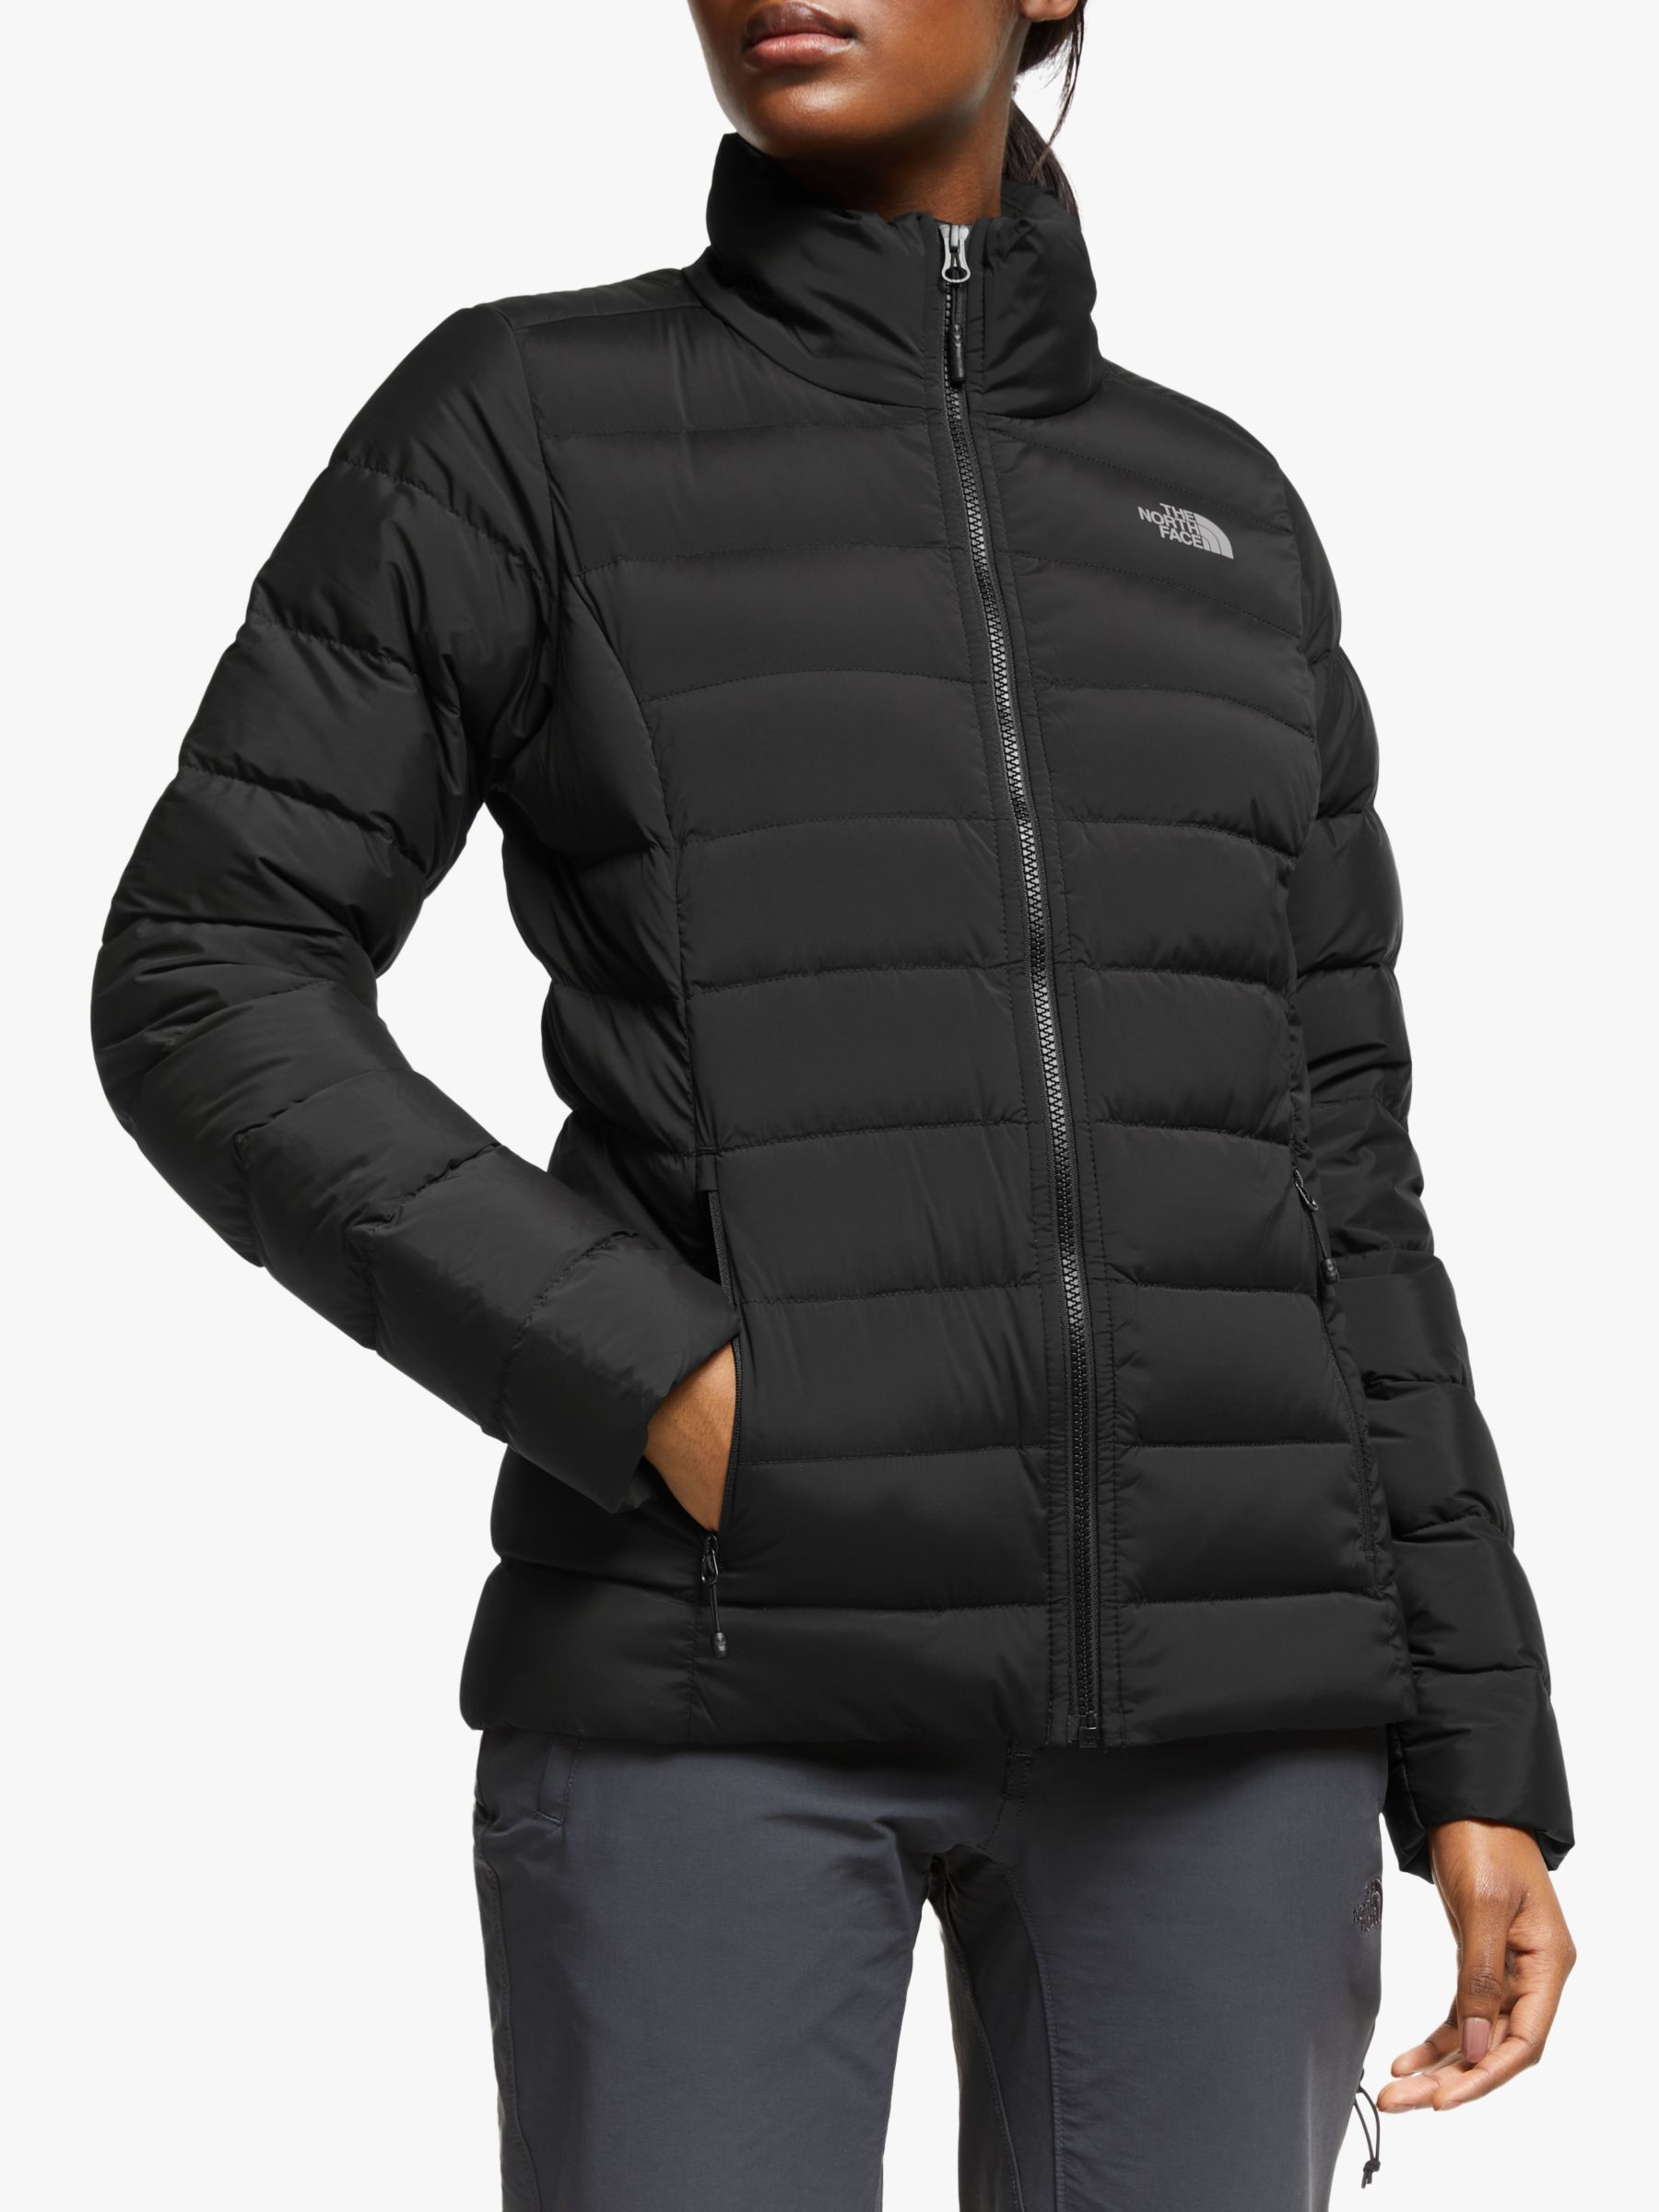 the north face women's jacket